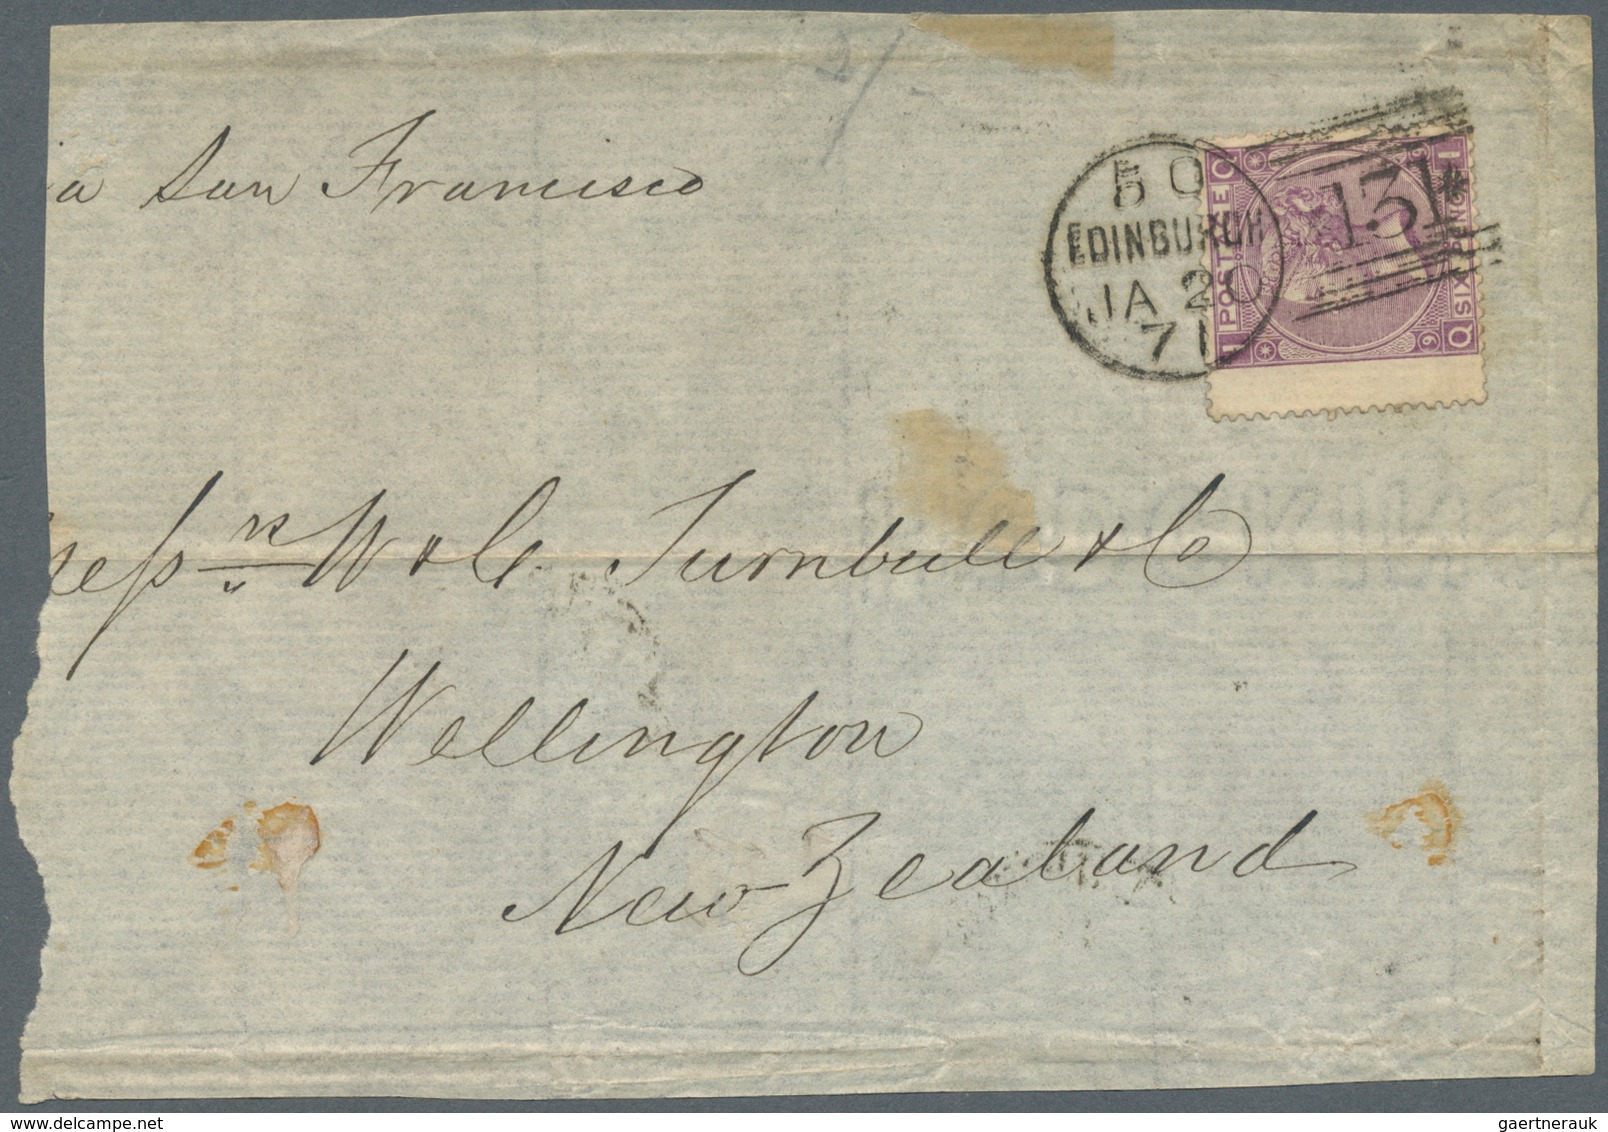 Großbritannien: 1861/1877, assortment of more than 40 fronts/large fragments addressed to New York,